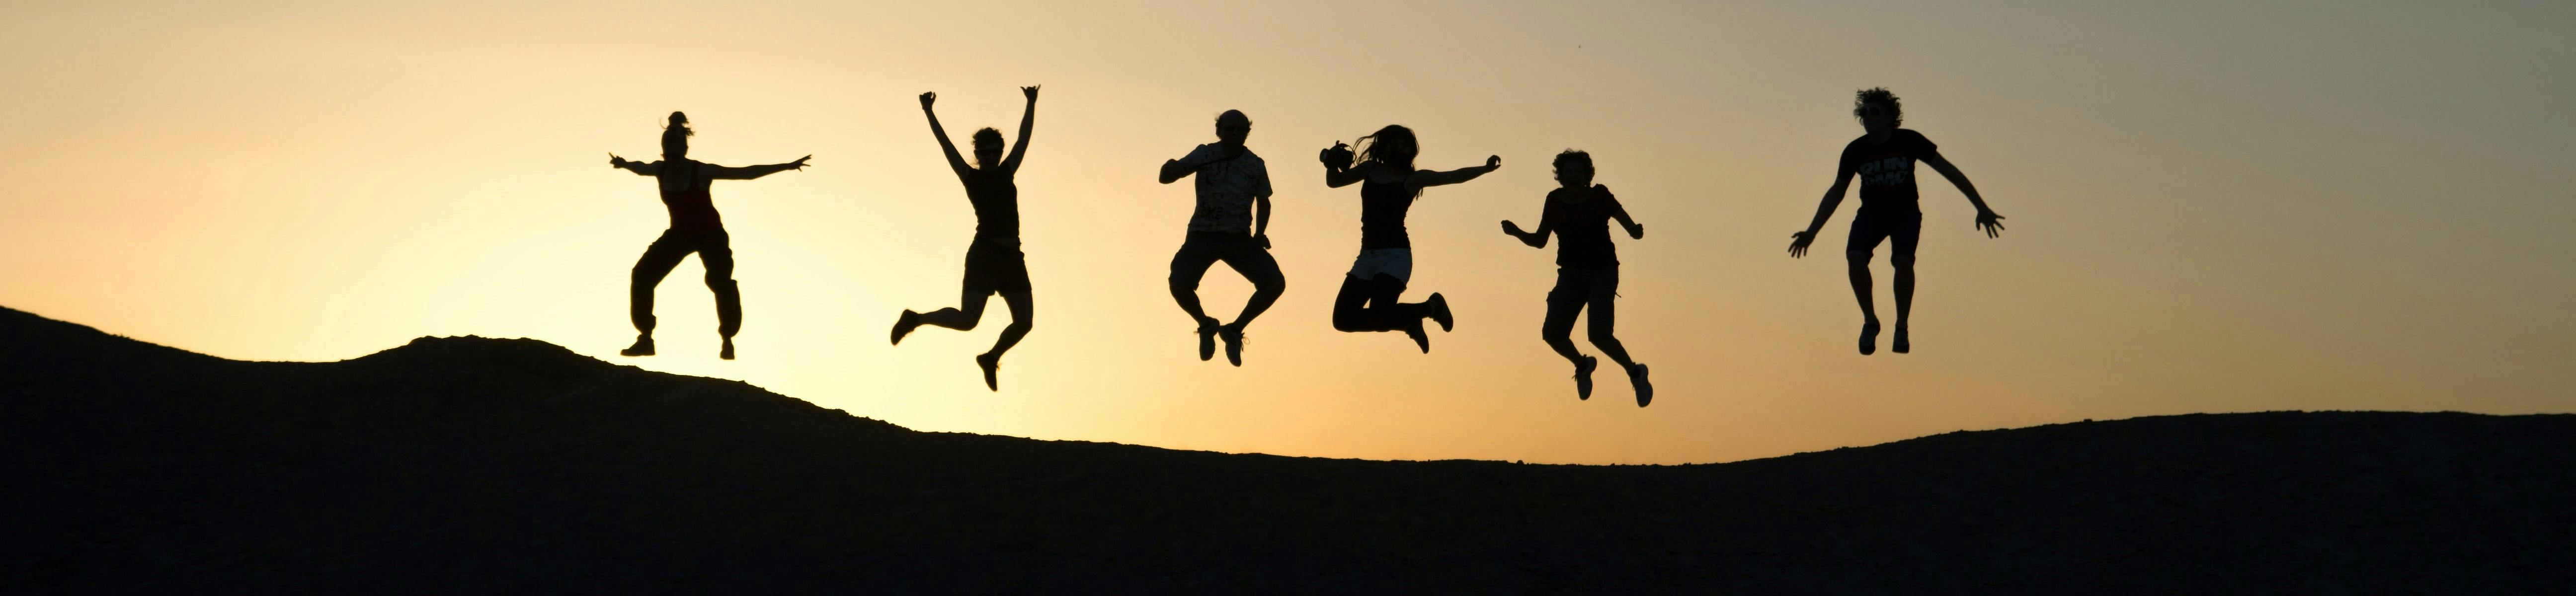 people jumping against a sunset